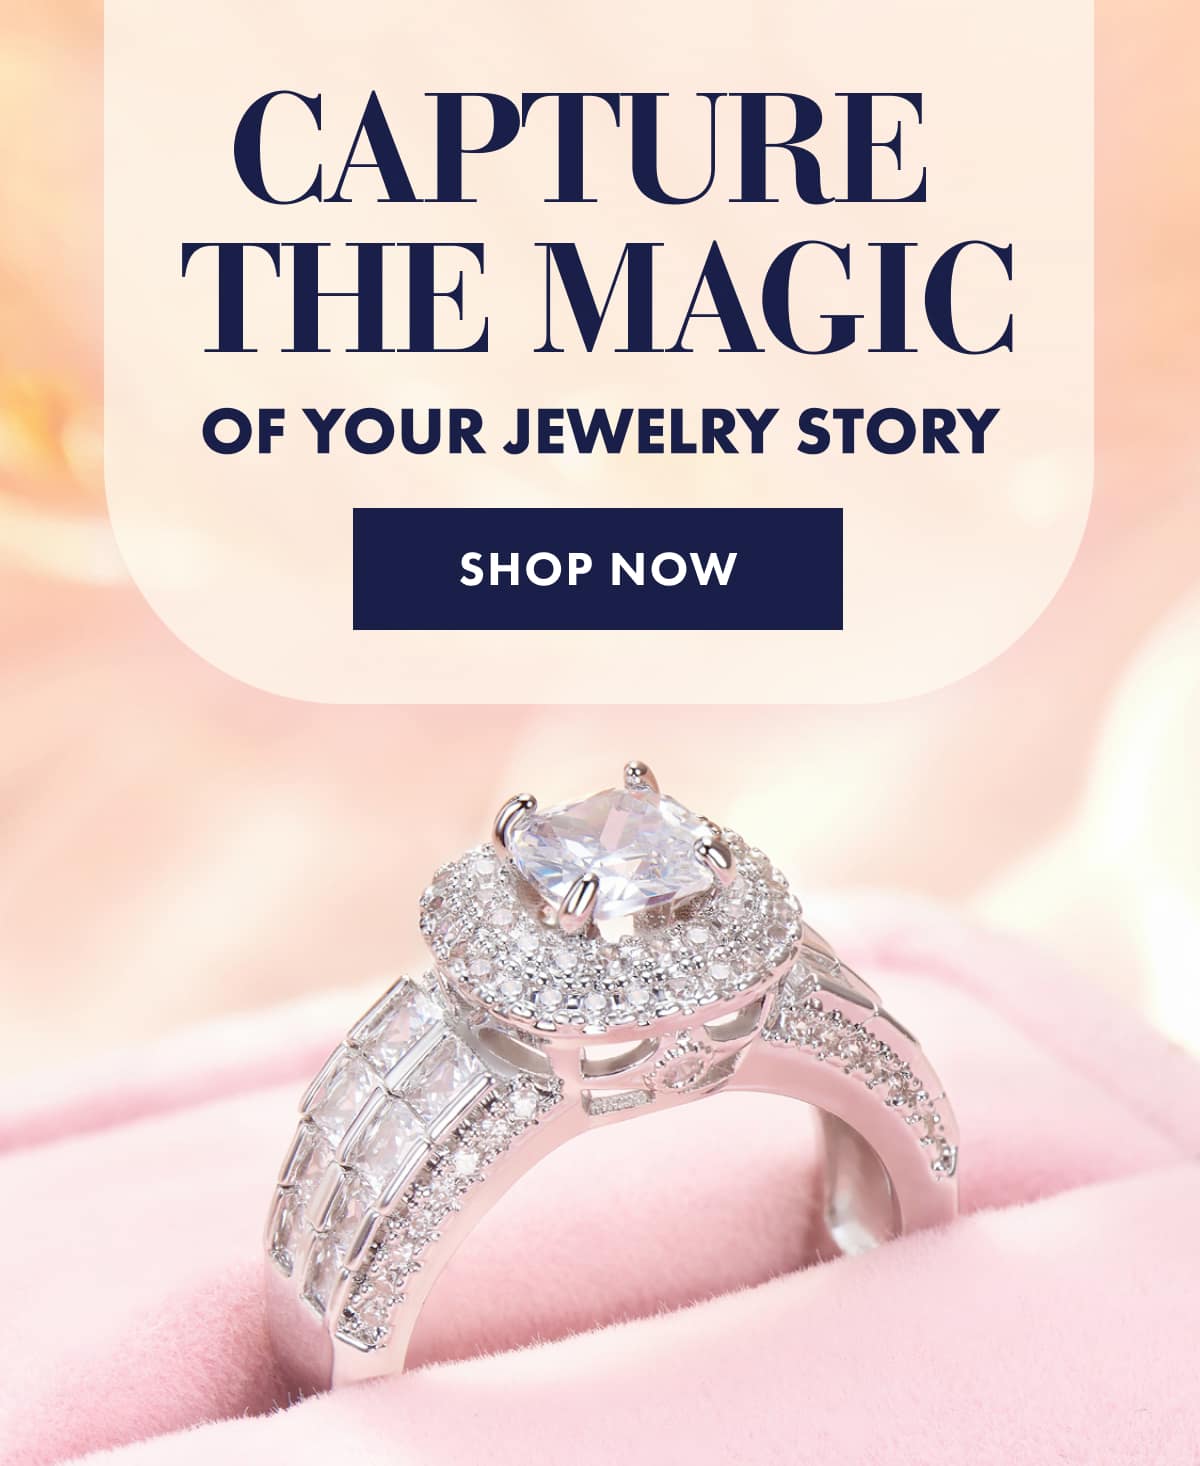 Capture the Magic of Your Jewelry Story